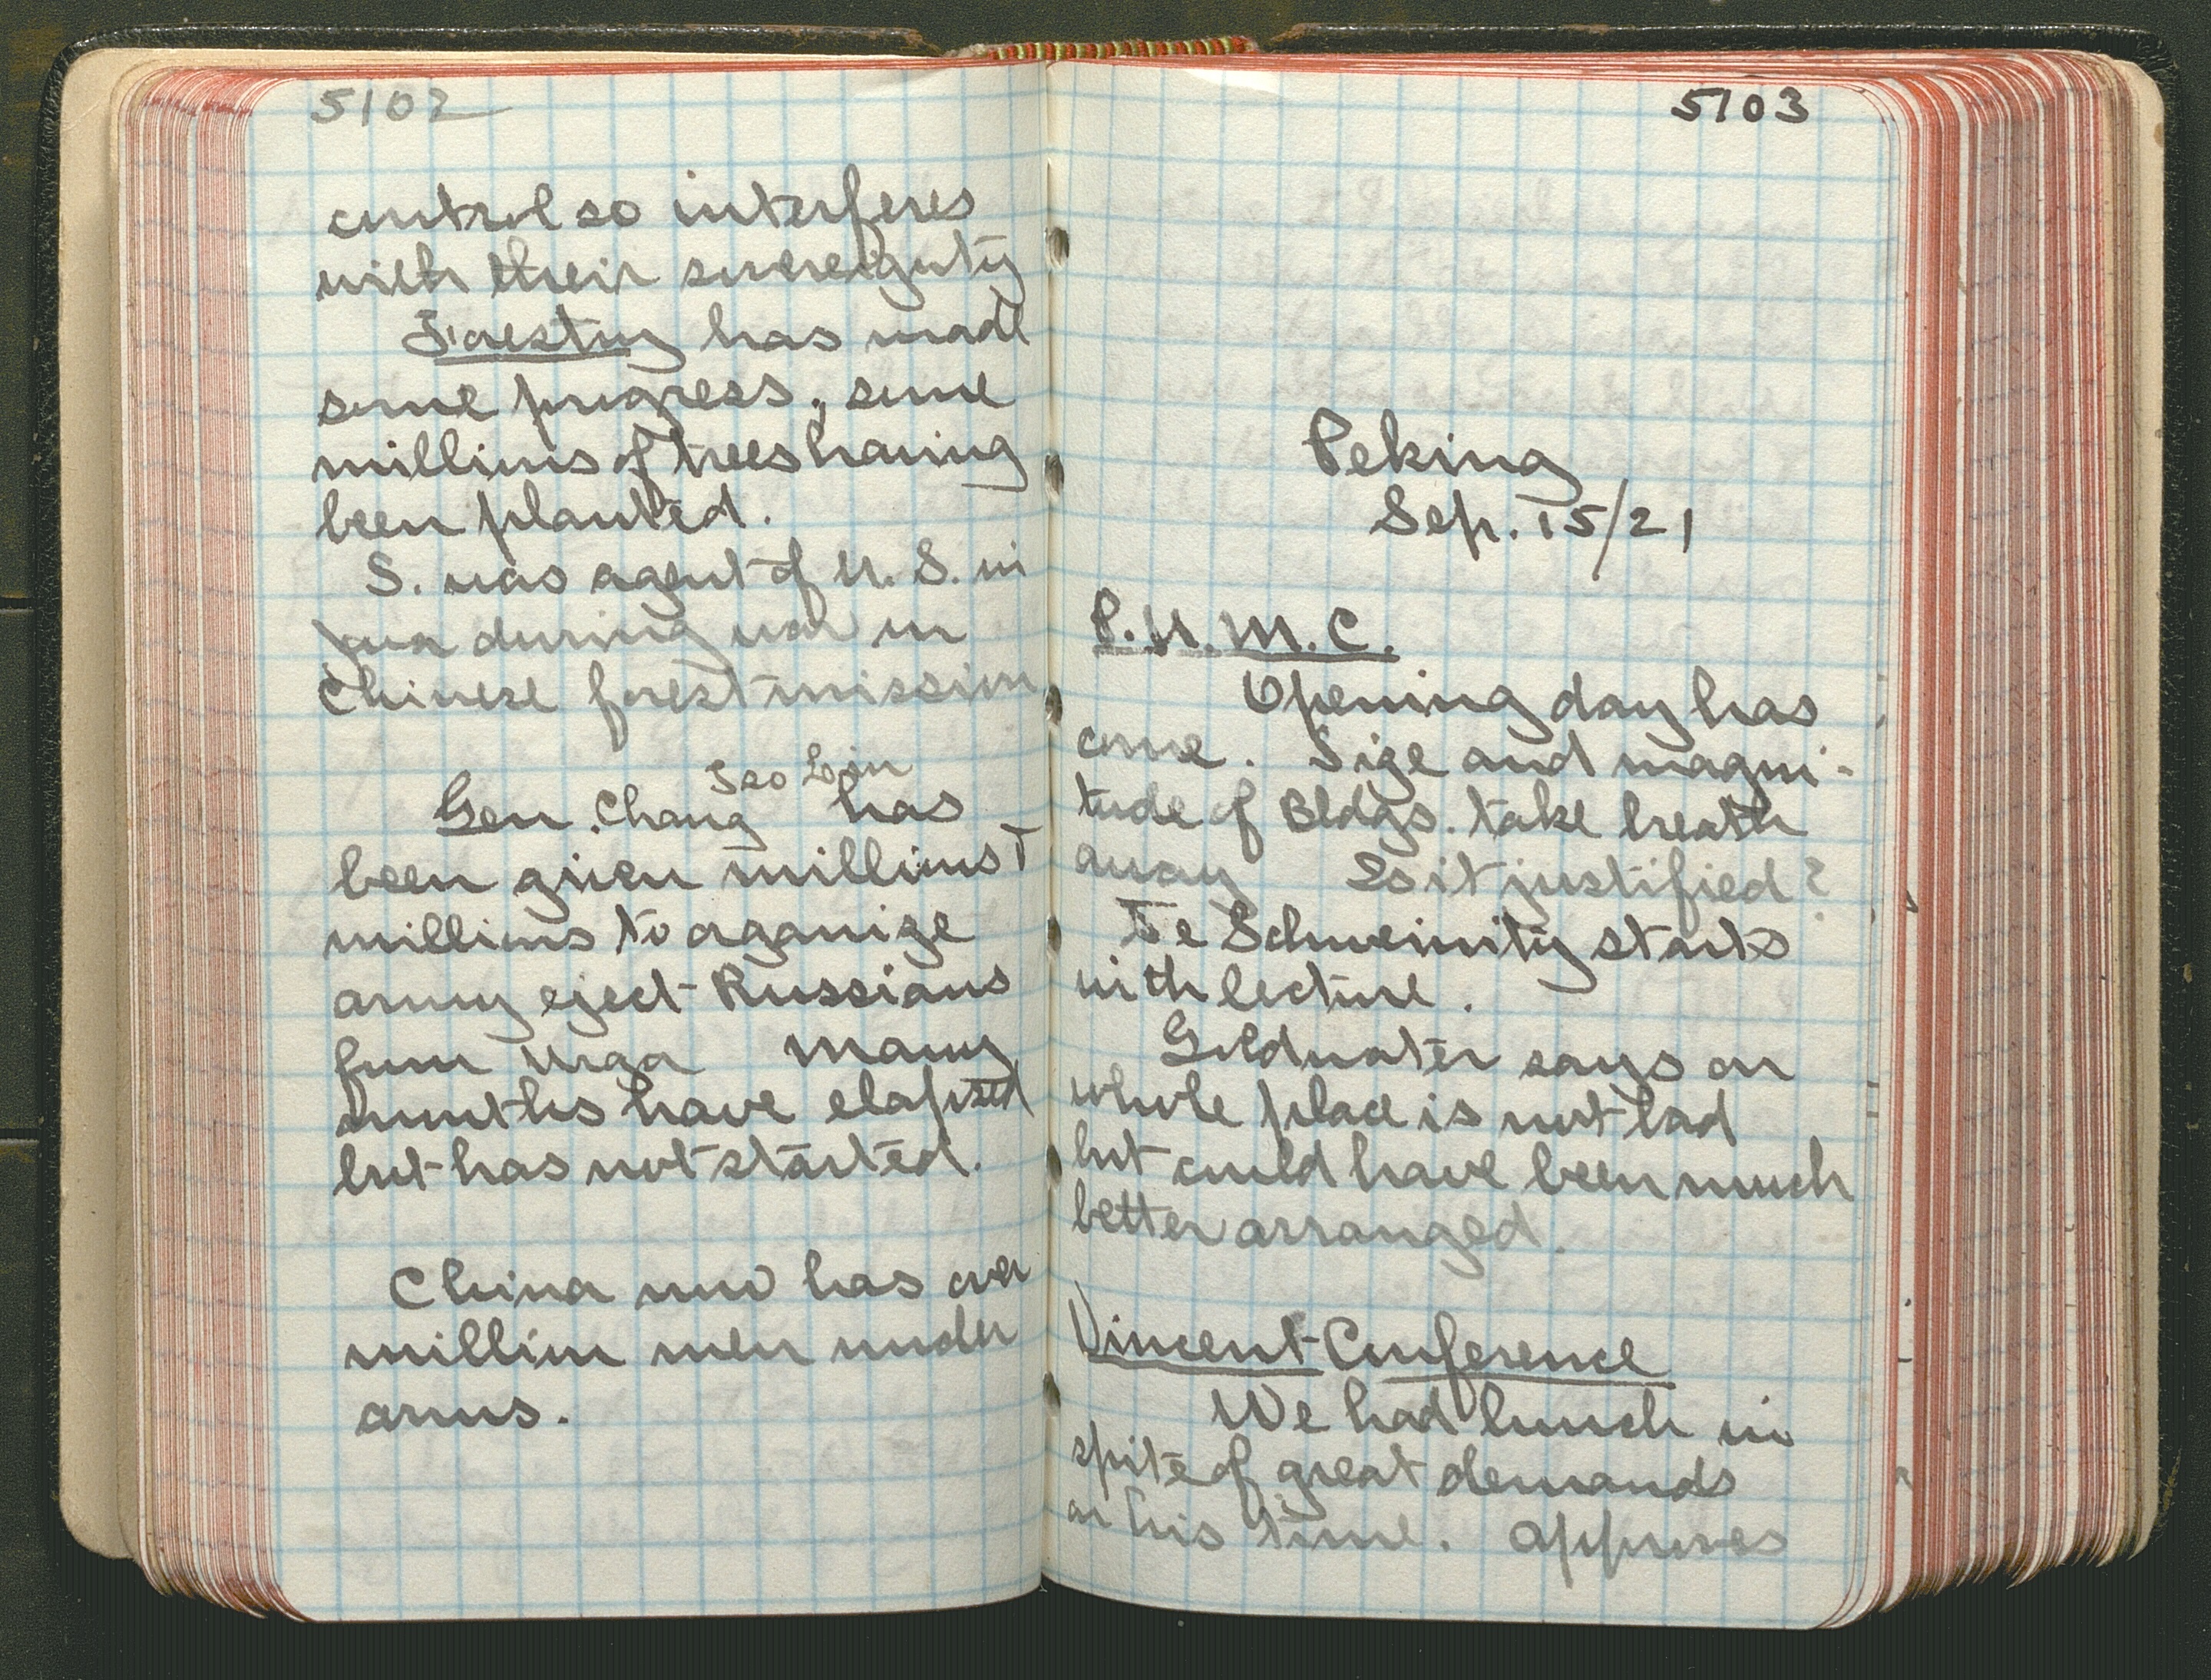 scan of page of diary from Peking, September 15, 1921